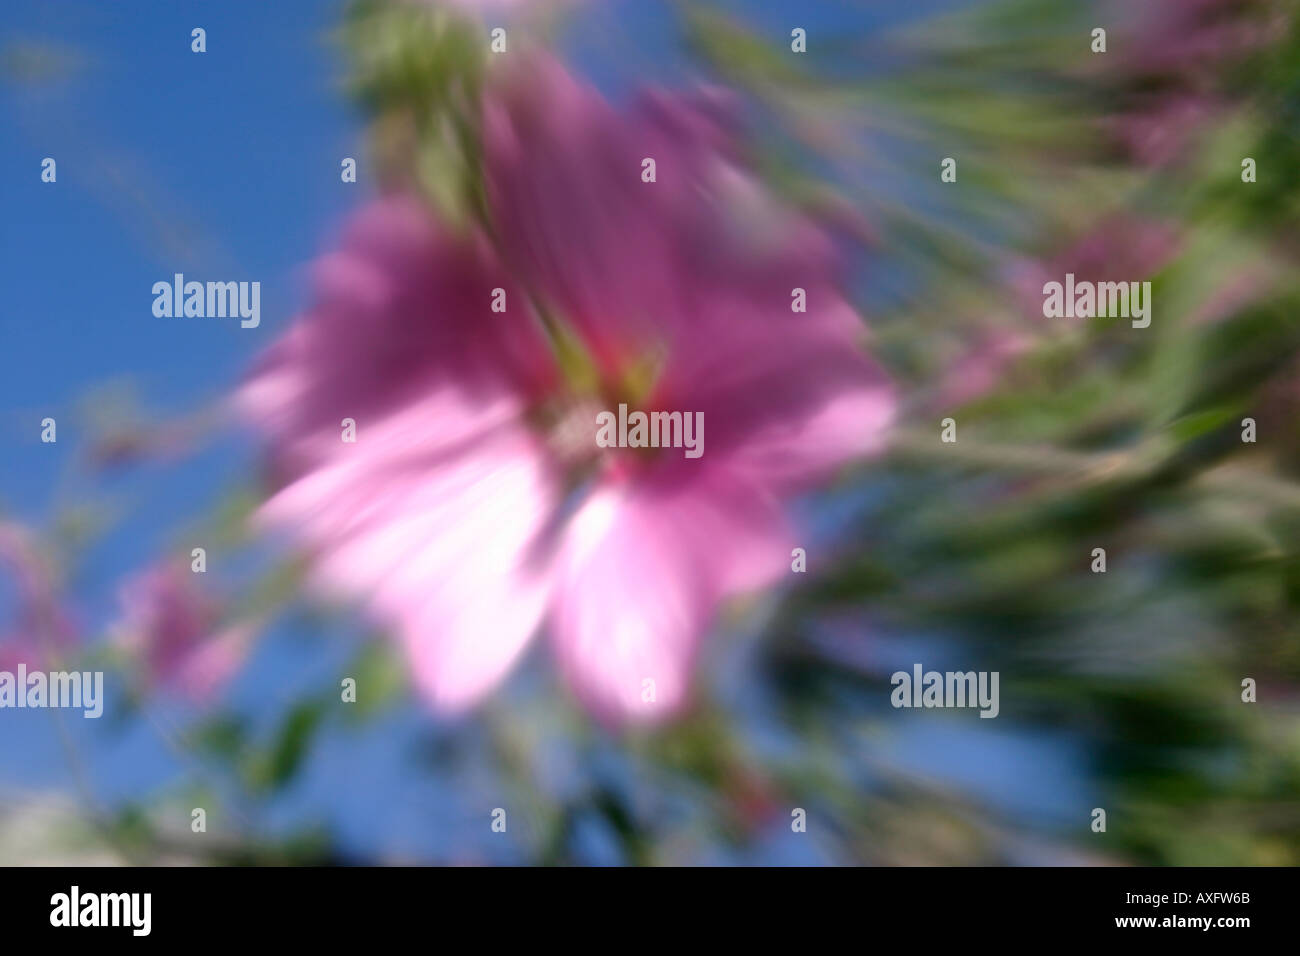 Blurred Image Of Lavatera Flowers Stock Photo